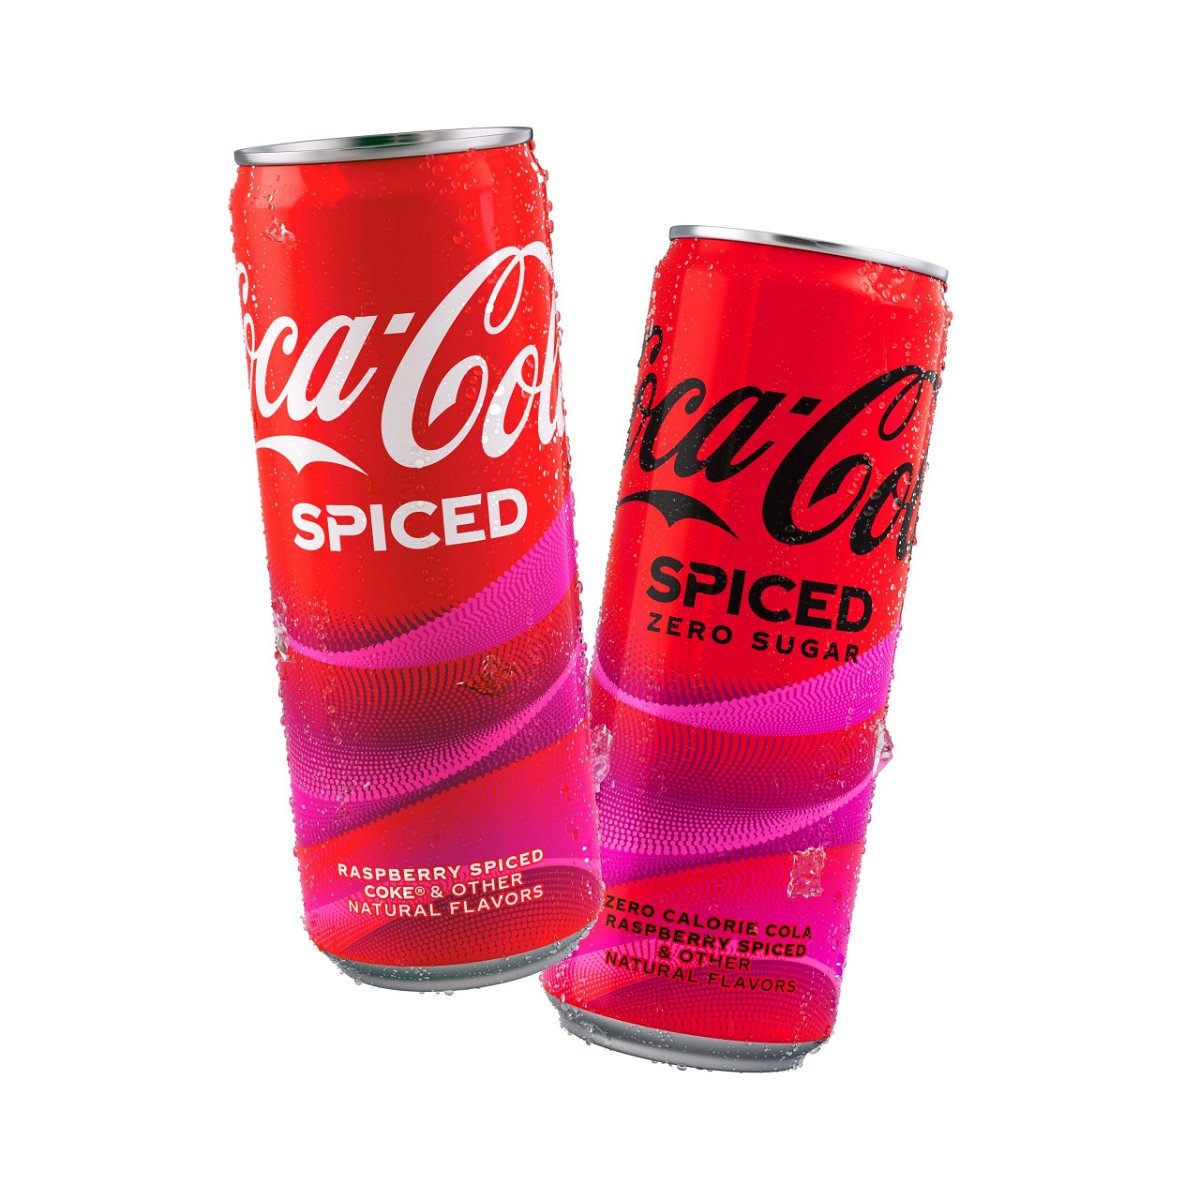 Coca-Cola Spiced hits shelves on February 19.